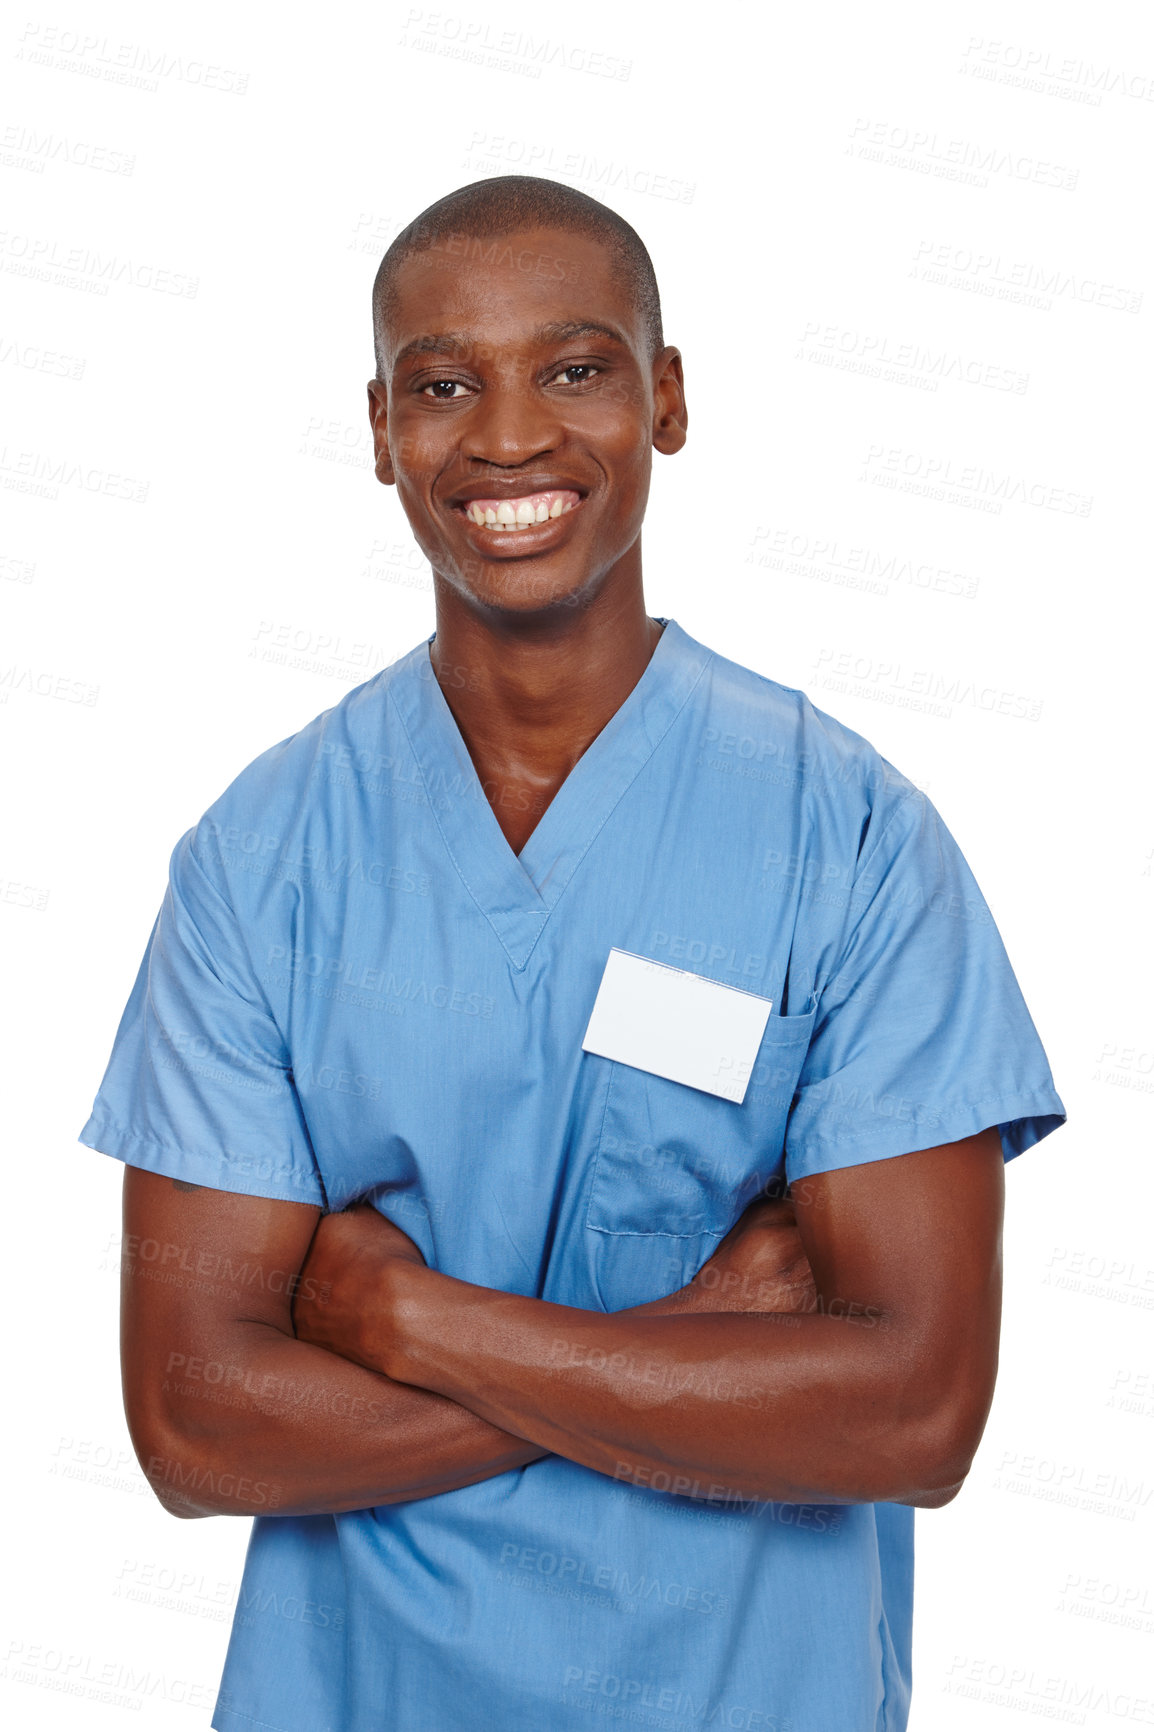 Buy stock photo Studio shot of a young doctor in blue scrubs